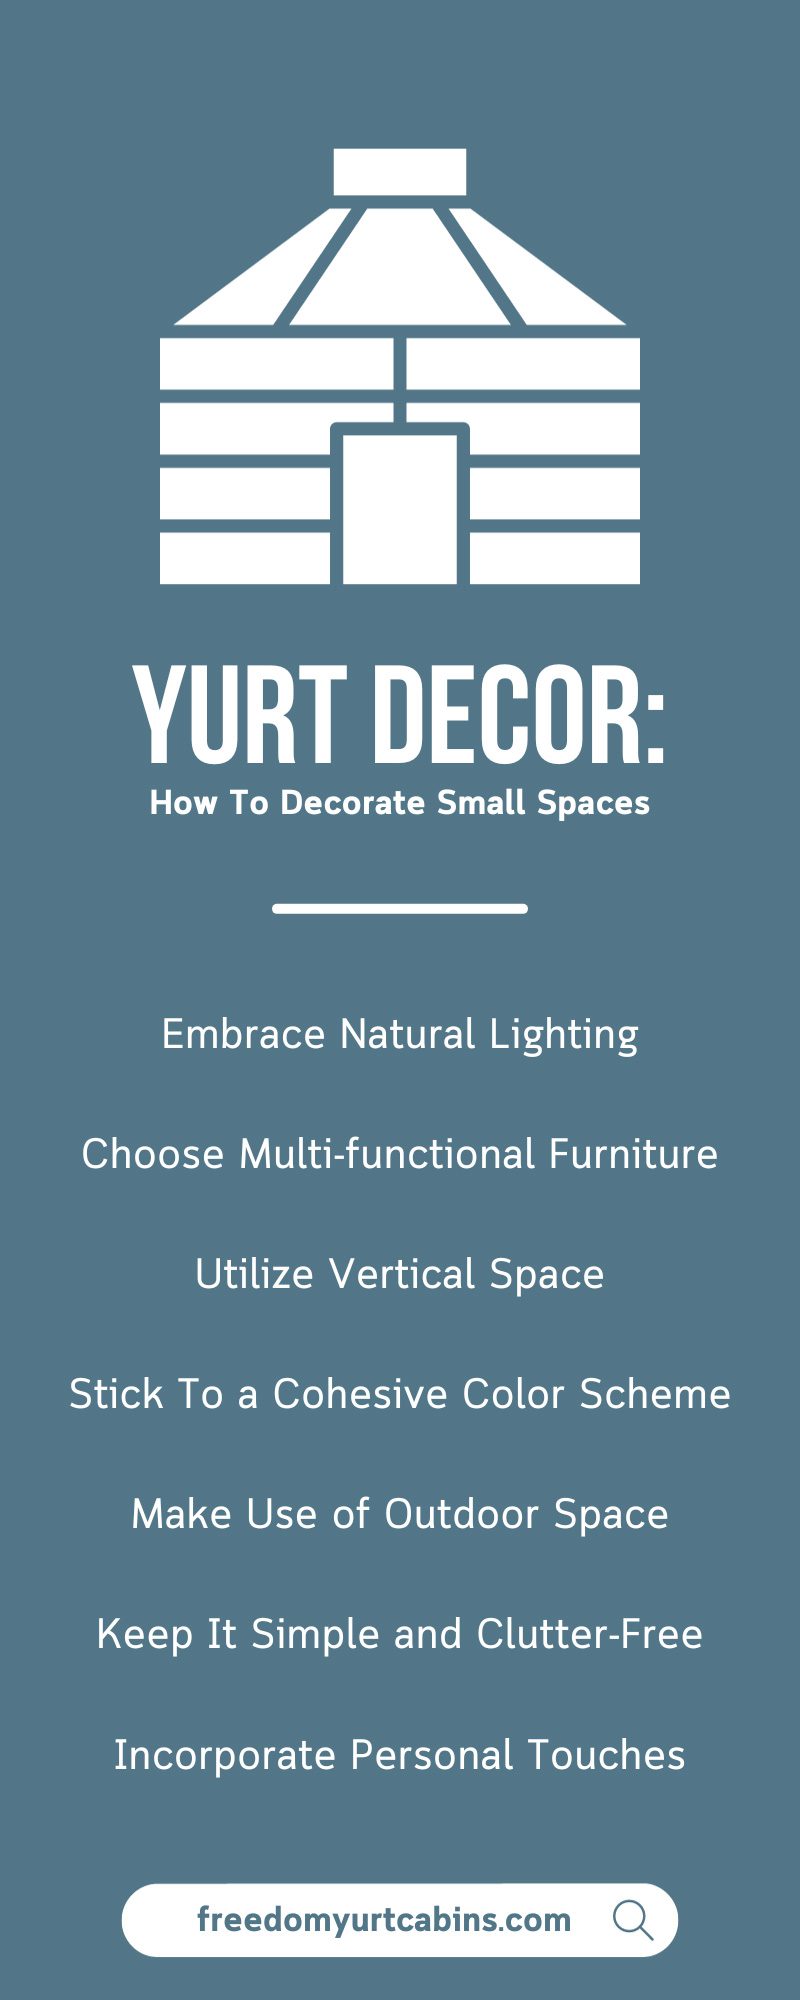 Yurt Decor: How To Decorate Small Spaces